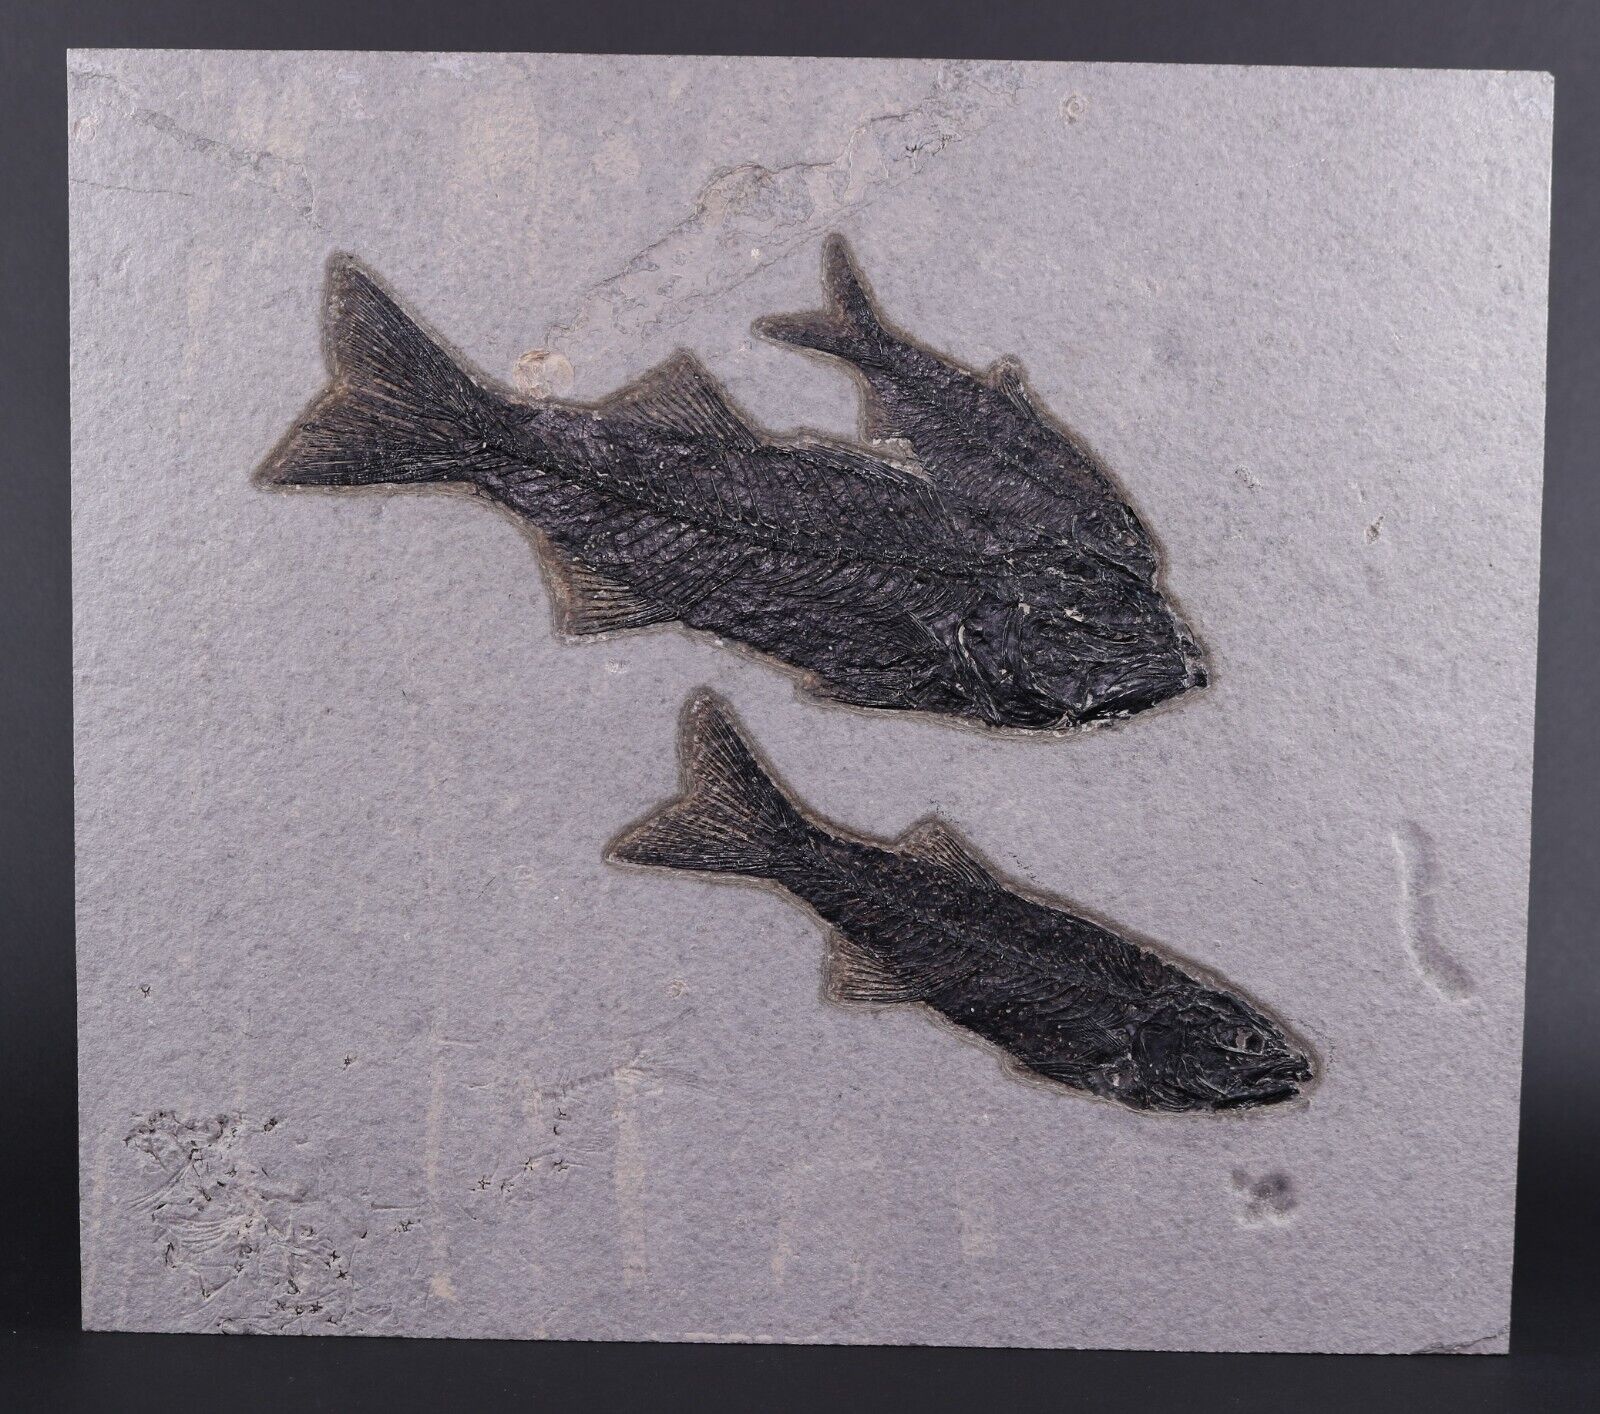 Superb 2 Mioplosus 1 Knightia from Capping Layer Fossil Lake Wyoming WY COA 6022